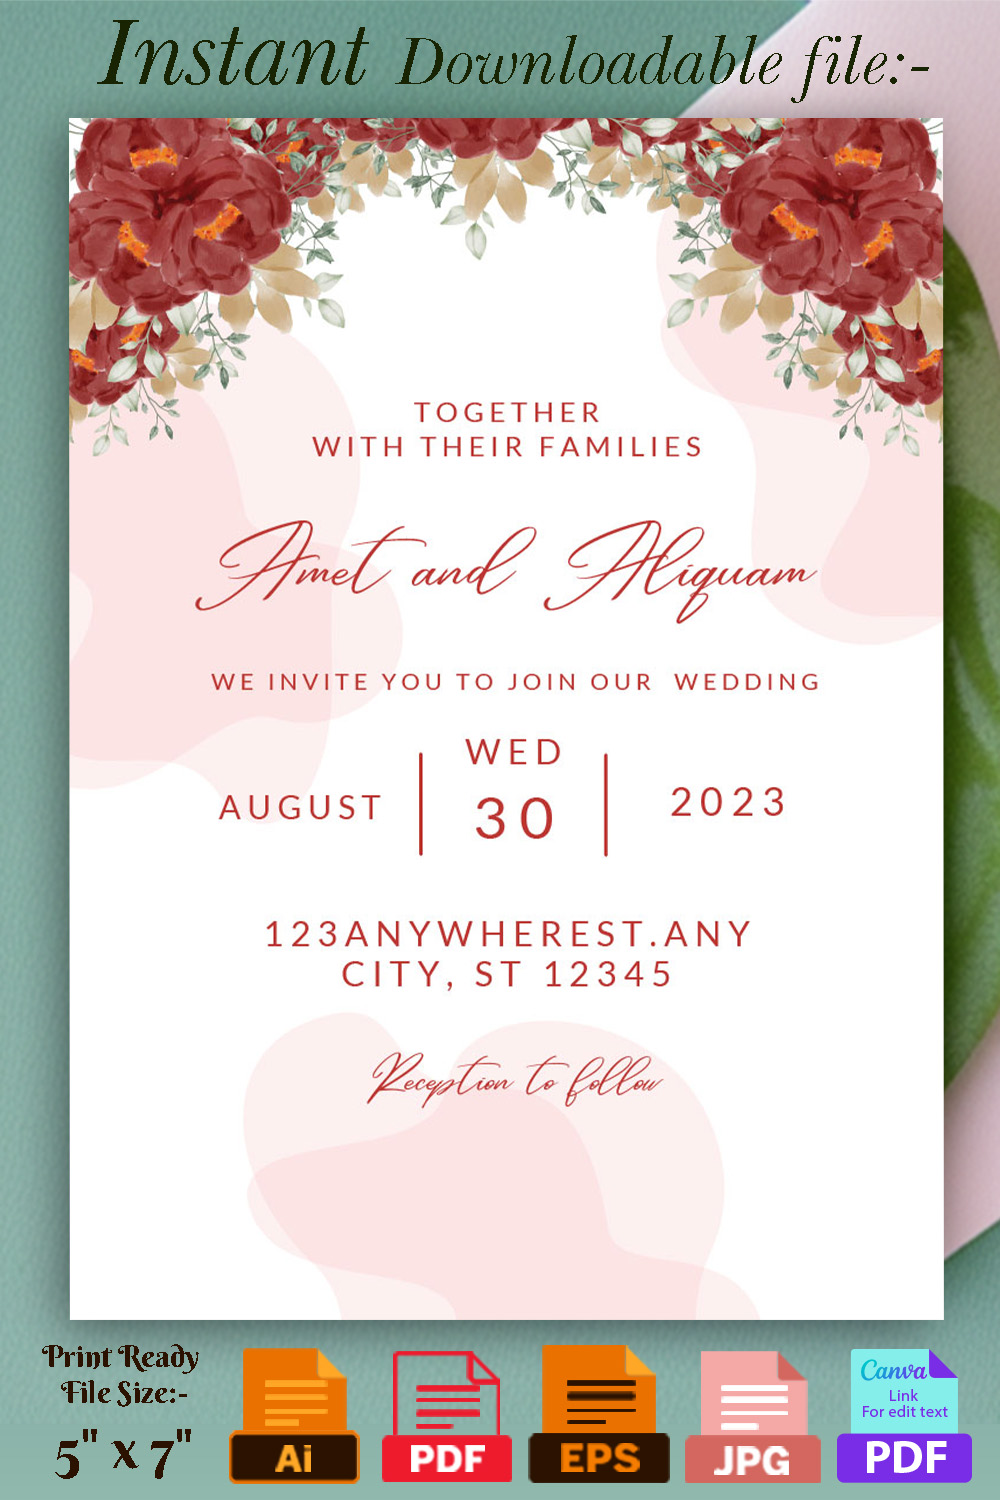 Image of colorful wedding invitation with flowers.